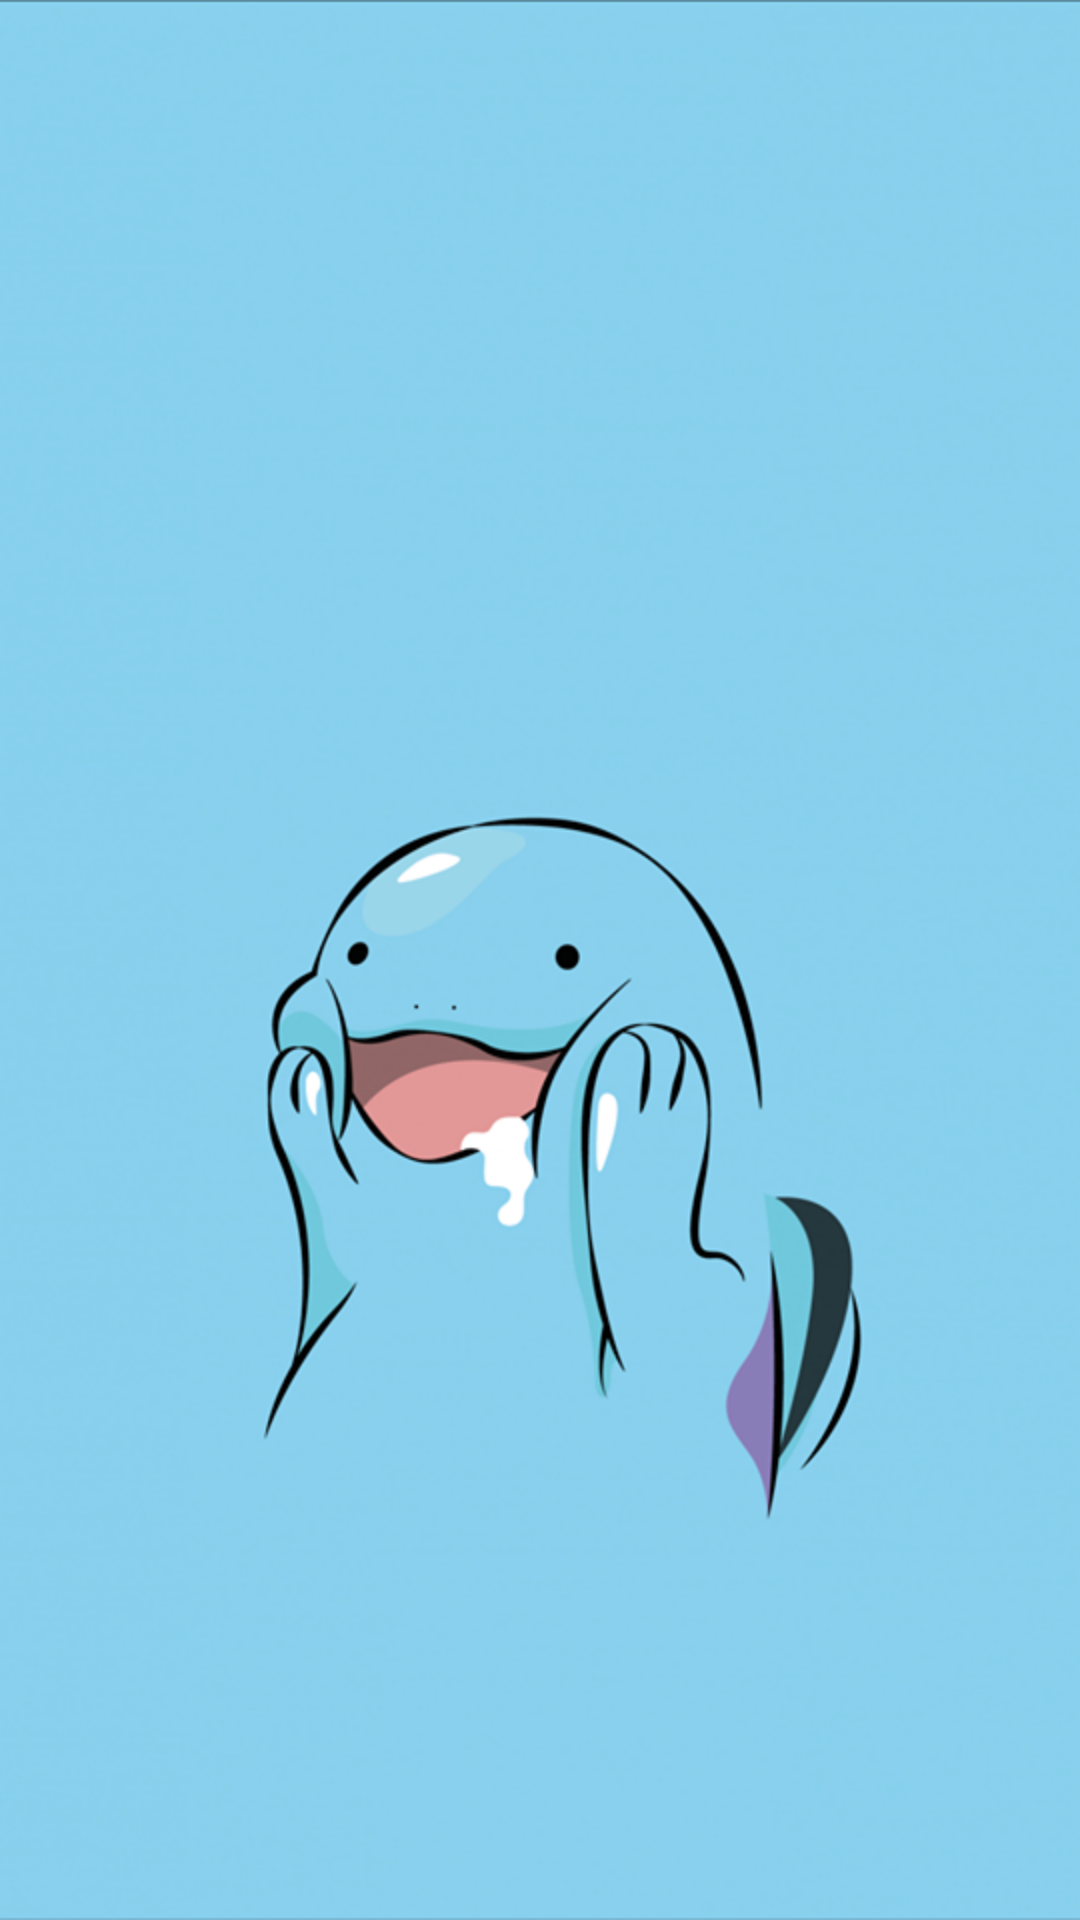 Free download Quagsire Wallpaper 48100 1920x1080px [1920x1080] for your